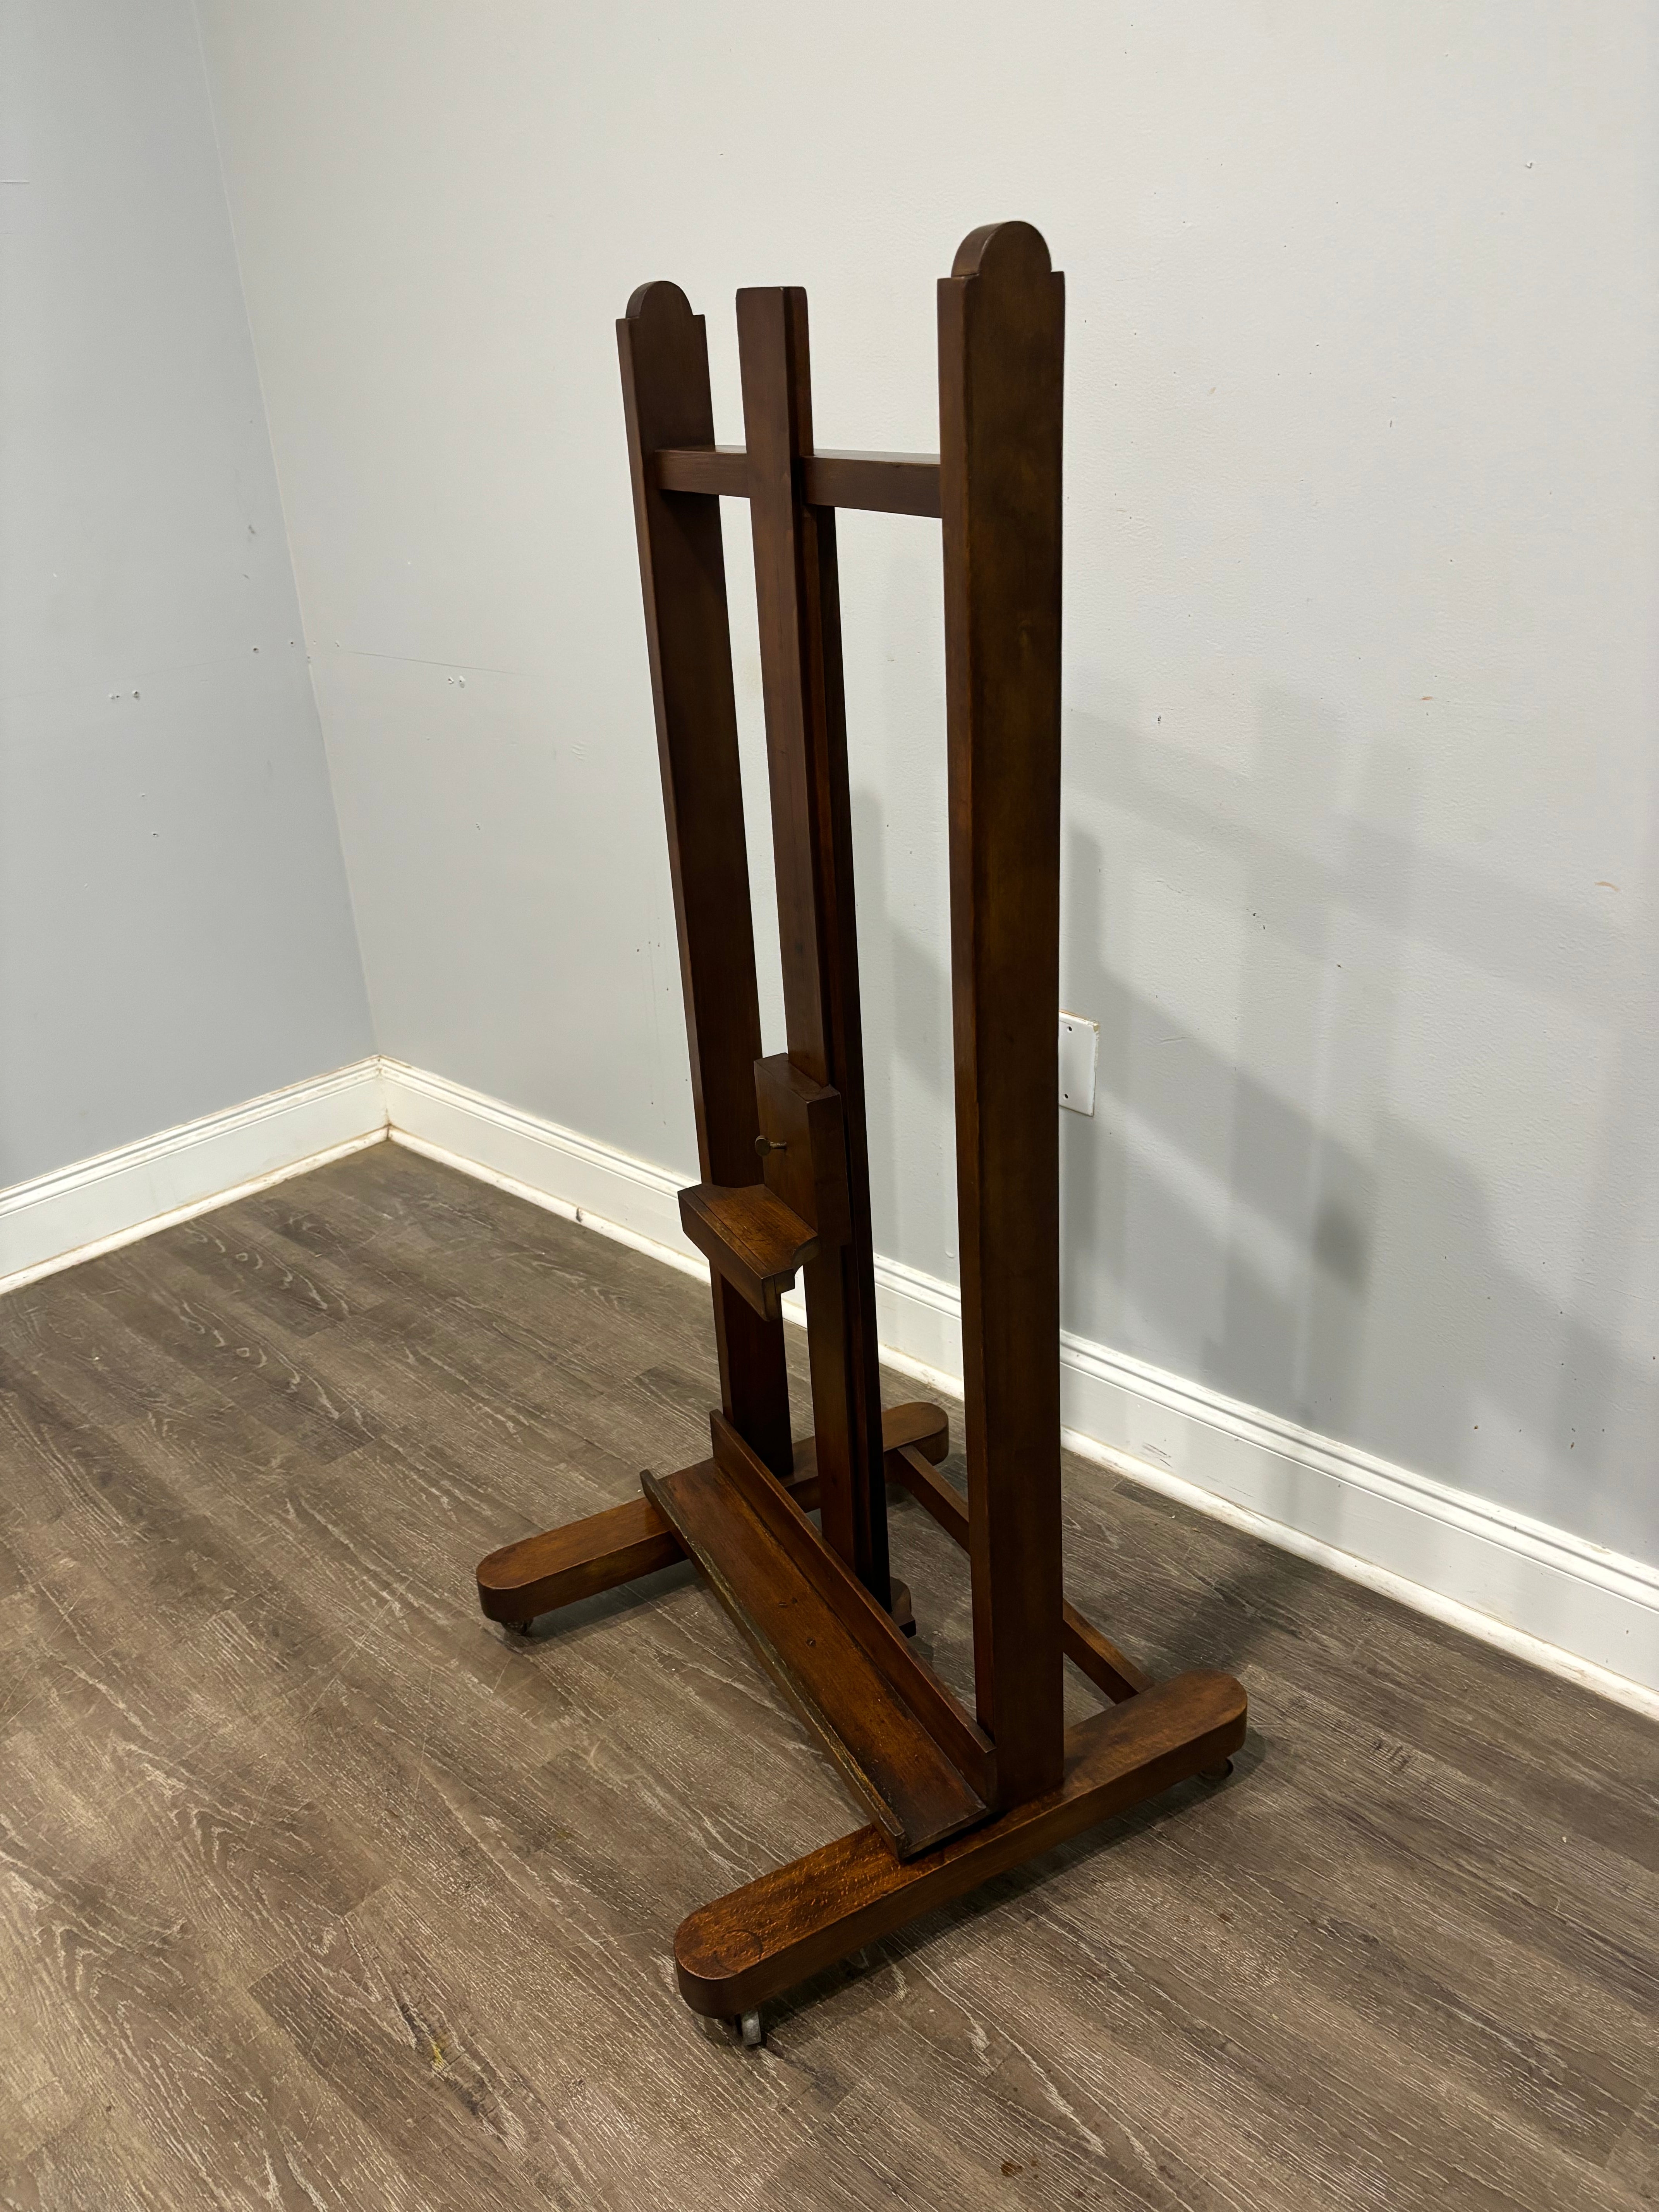 French 19th Century Easel In Good Condition For Sale In Stockbridge, GA